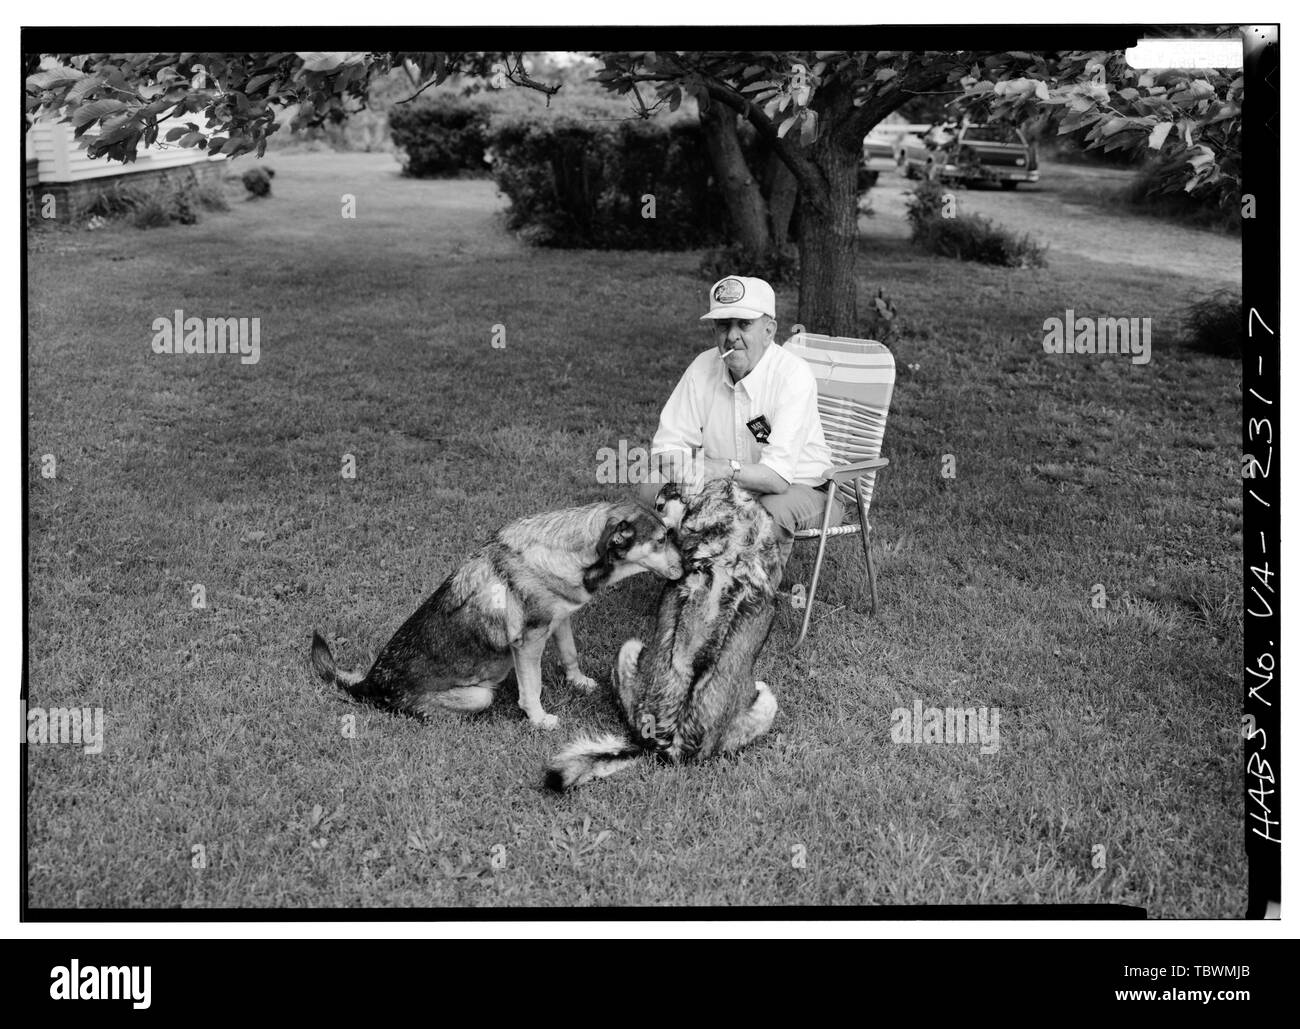 MR. WILBUR C. SWAN AND HIS DOGS (Mr. Swan is the owner of the property)  Hard Bargain (Main House), Near Routes 695, 636 and 613 vicinity, Trevilians, Louisa County, VA Morris, Scott, transmitter DeBoer, Ruth, transmitter Price, Virginia B, transmitter Stock Photo